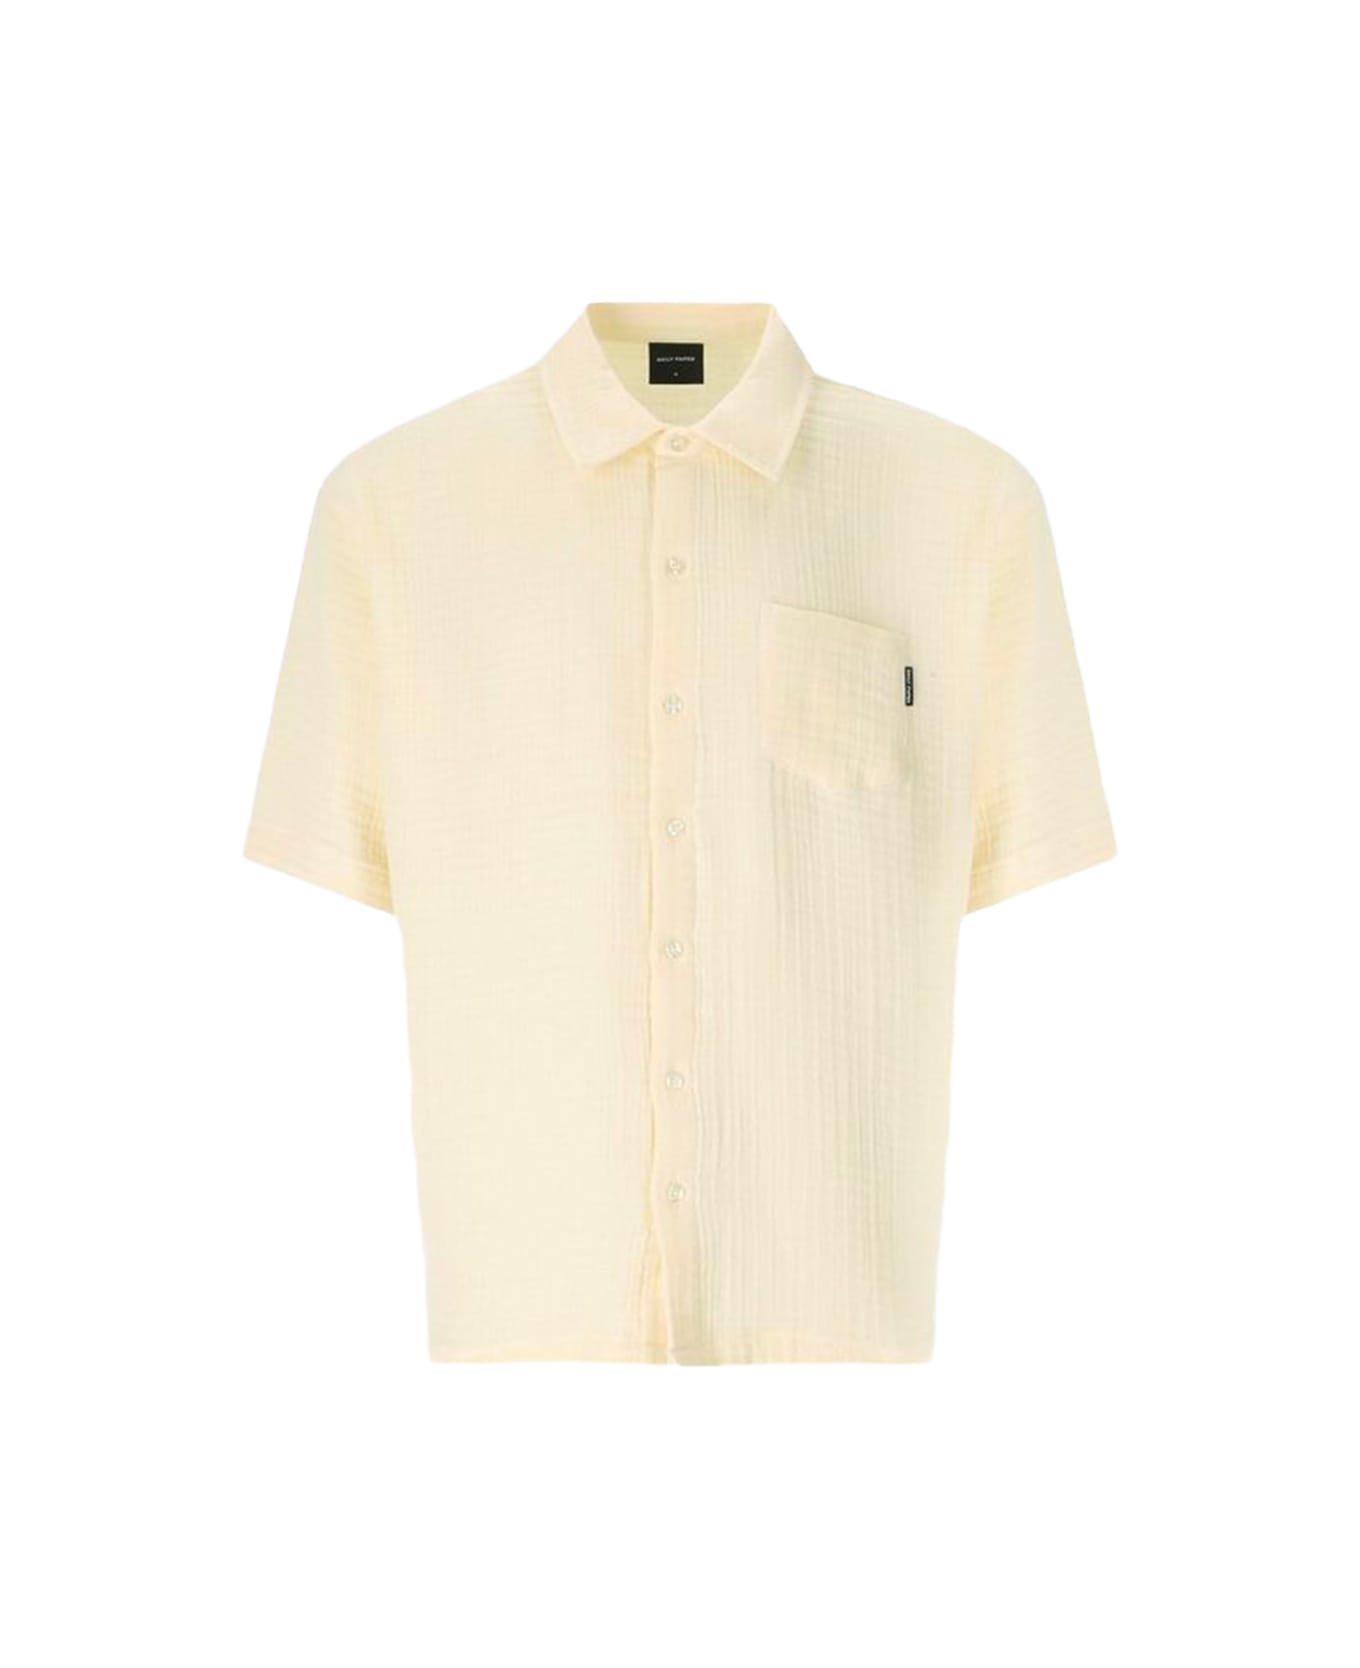 Daily Paper Yellow Cotton Shirt - ICING YELLOW シャツ